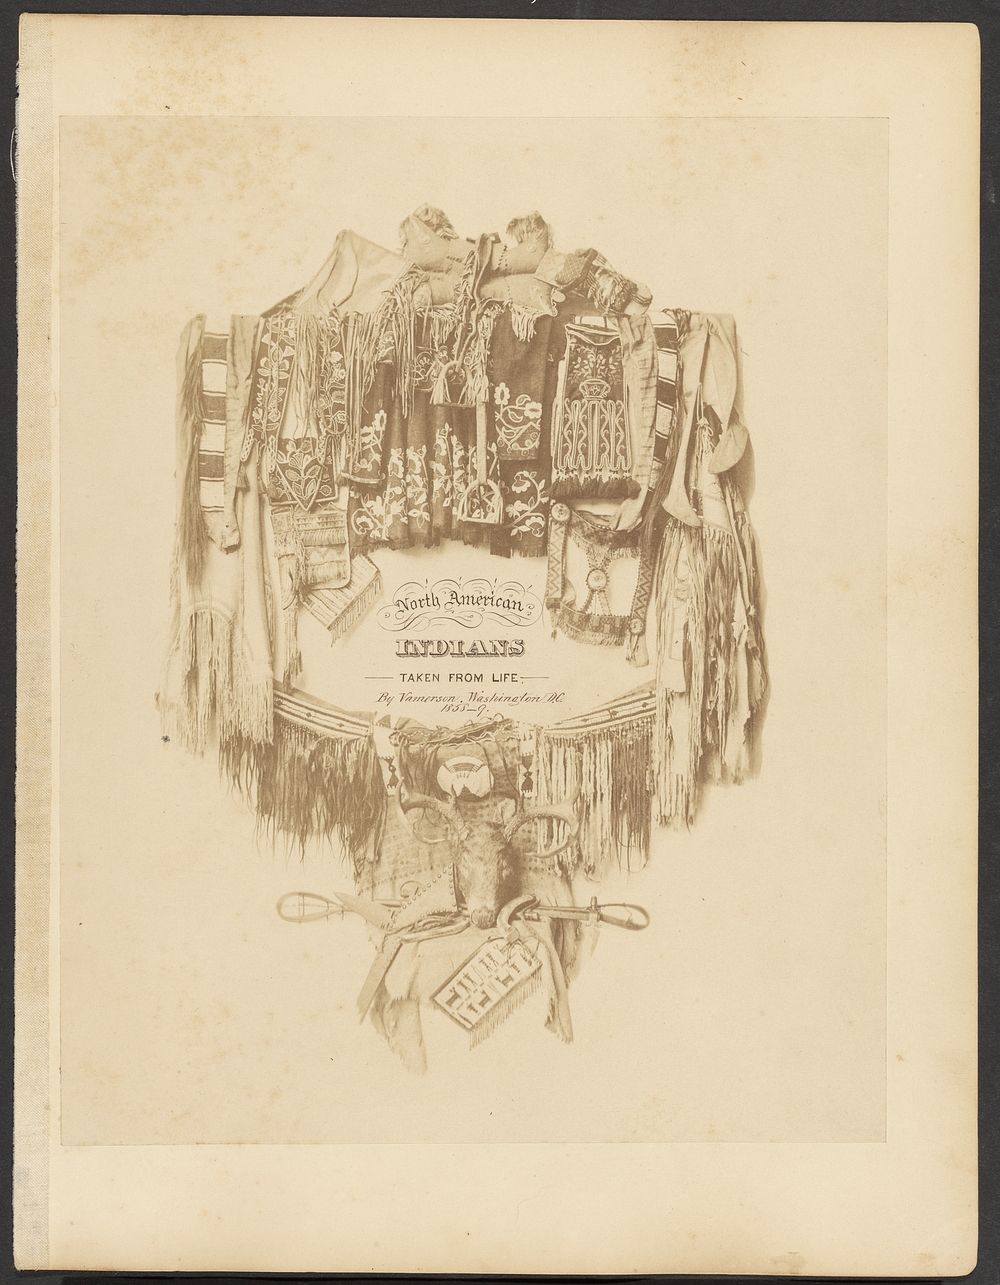 Title page for album "North American Indians" by Julian Vannerson